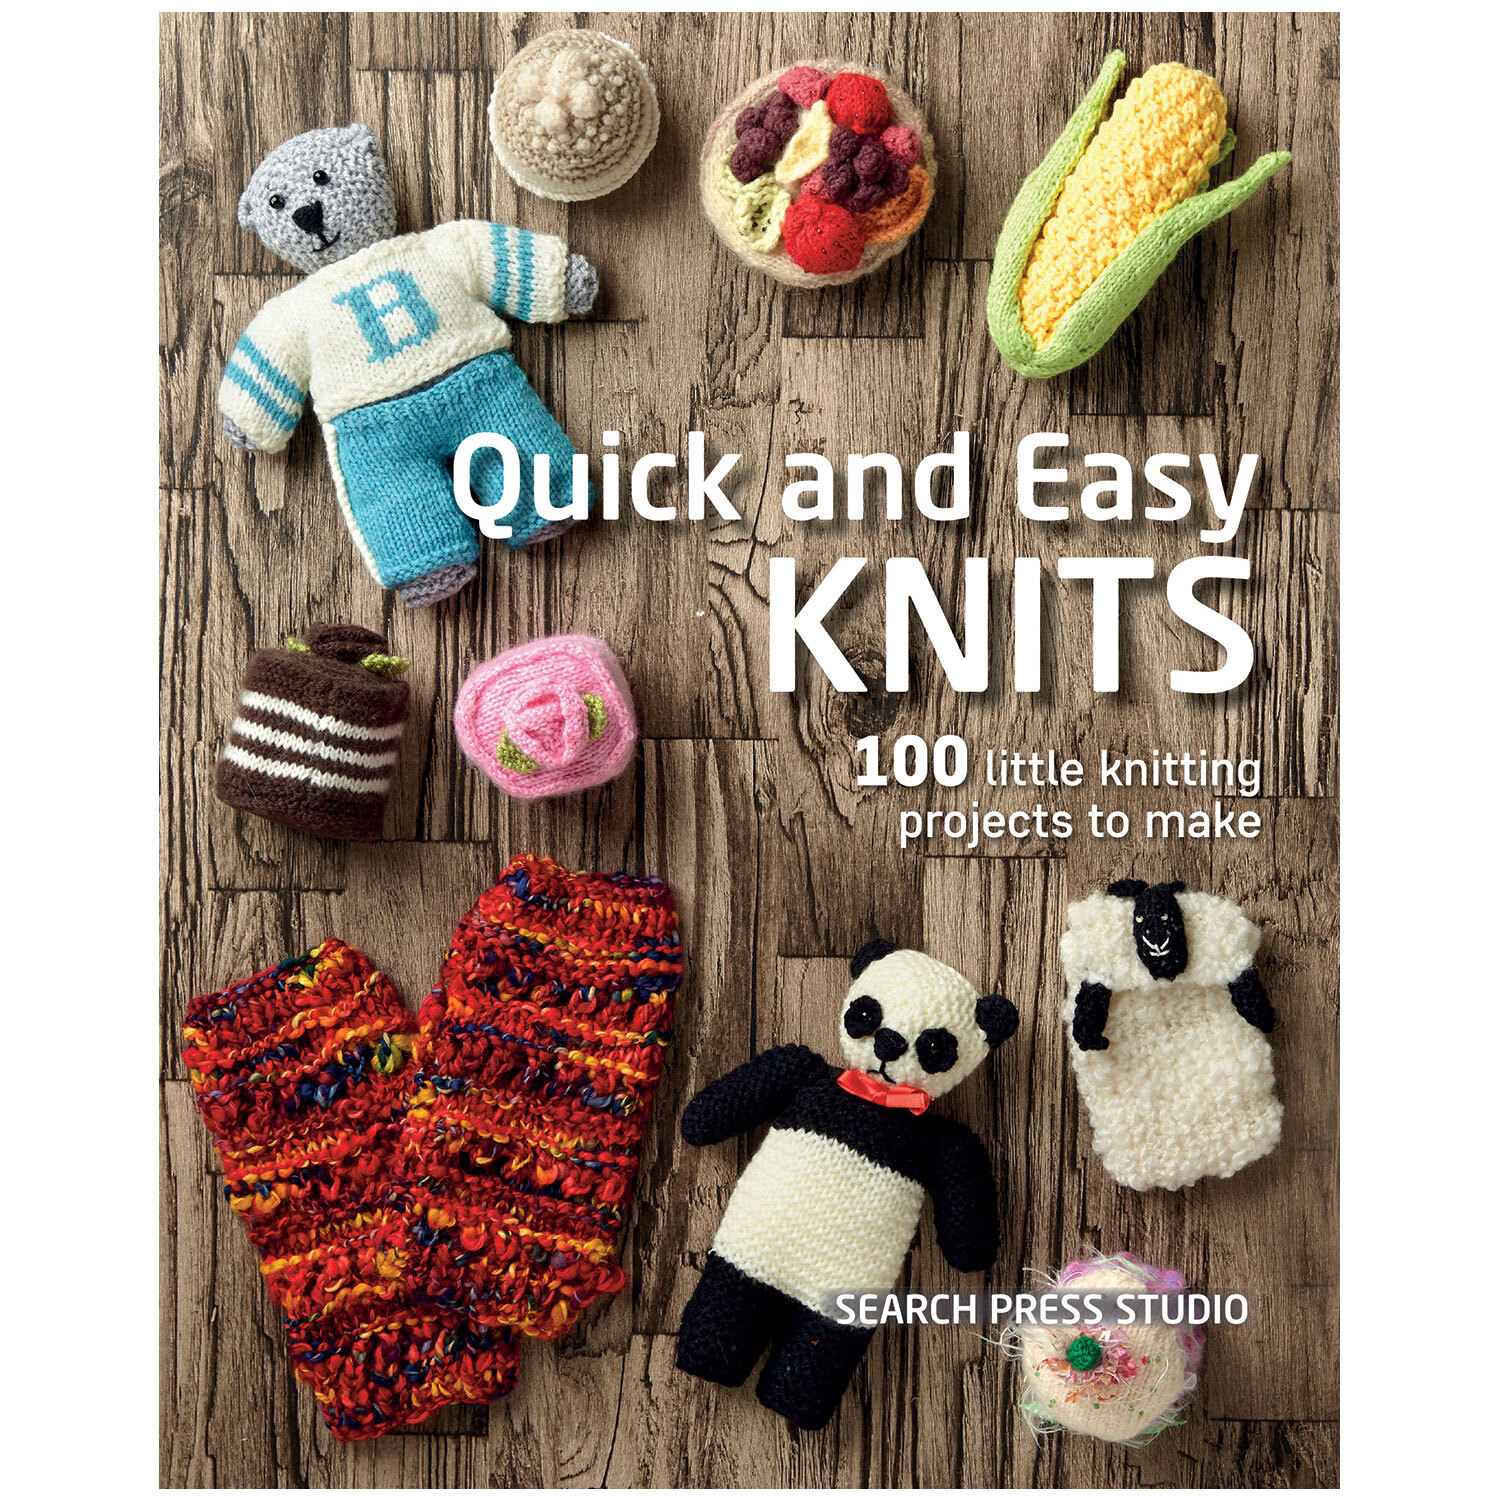 Quick and Easy Knitting Book Image